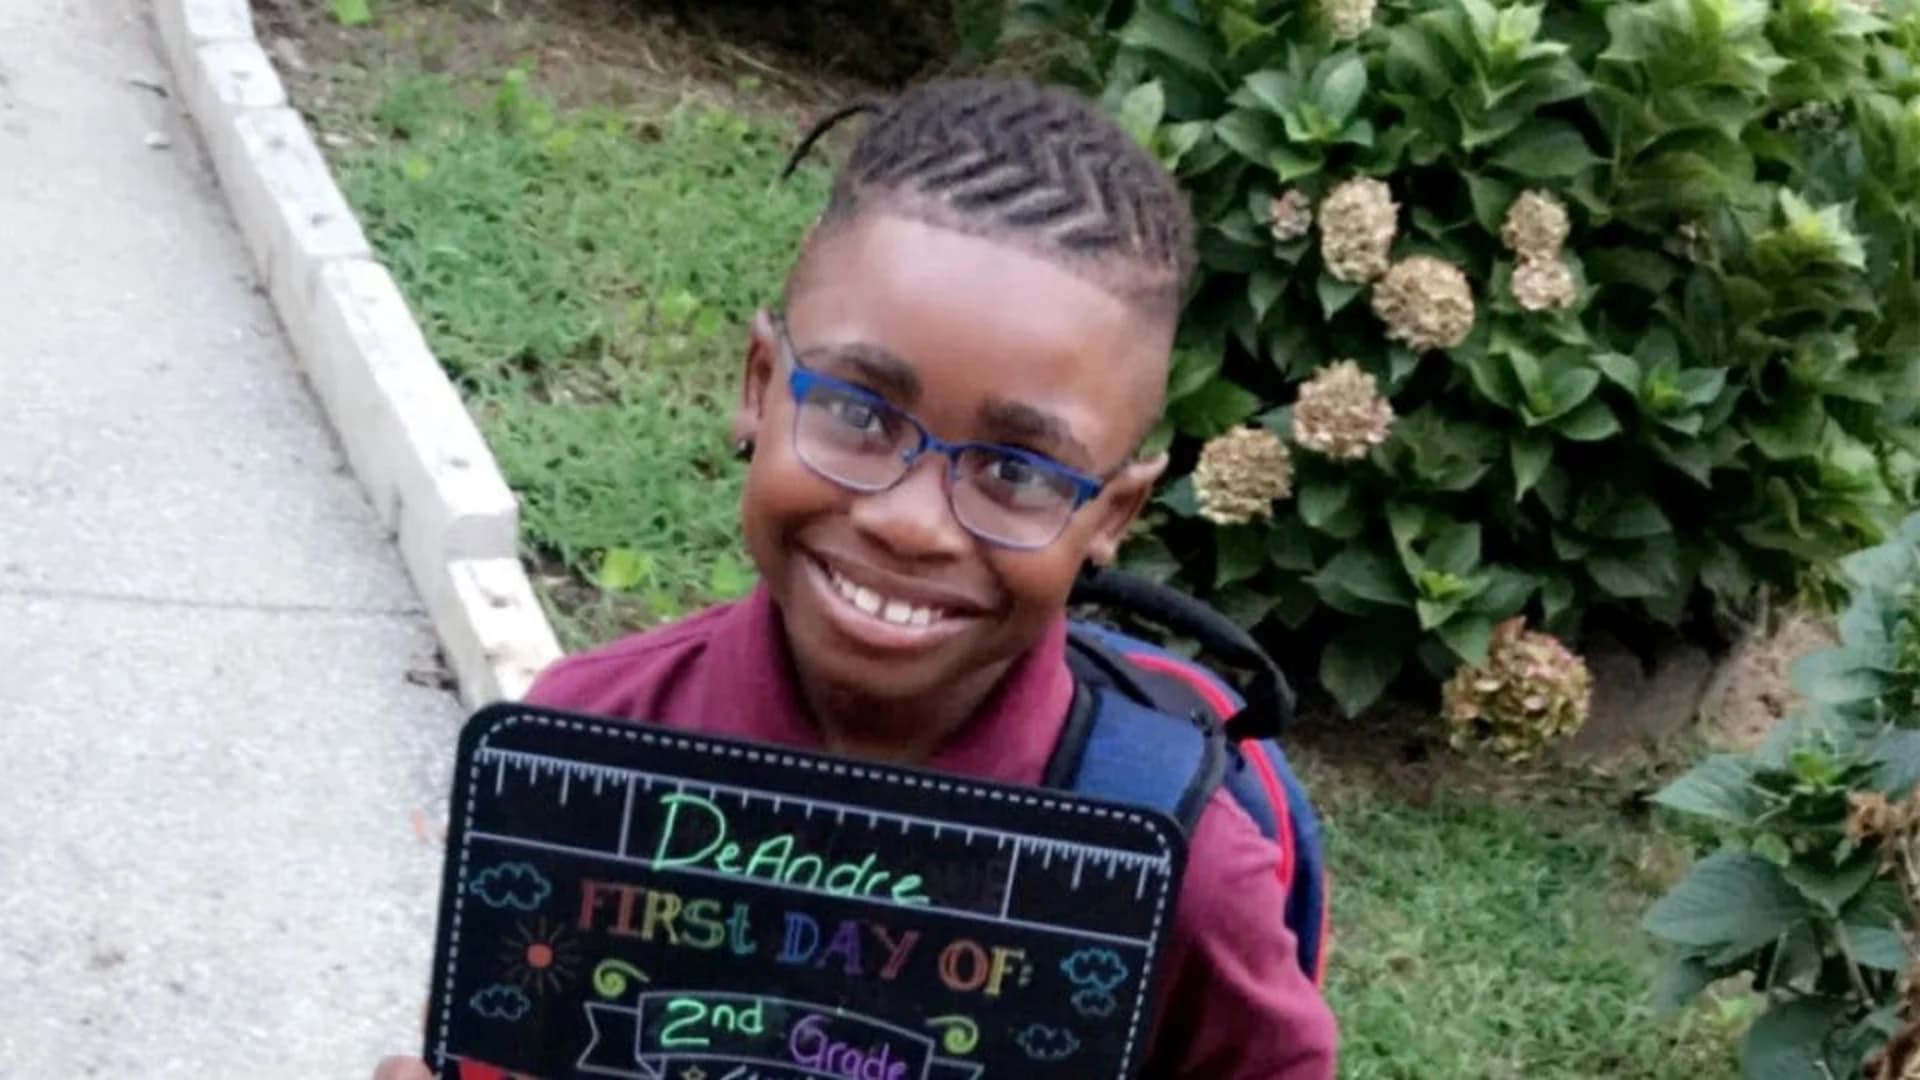 Your 2019 Connecticut Back-to-School Photos